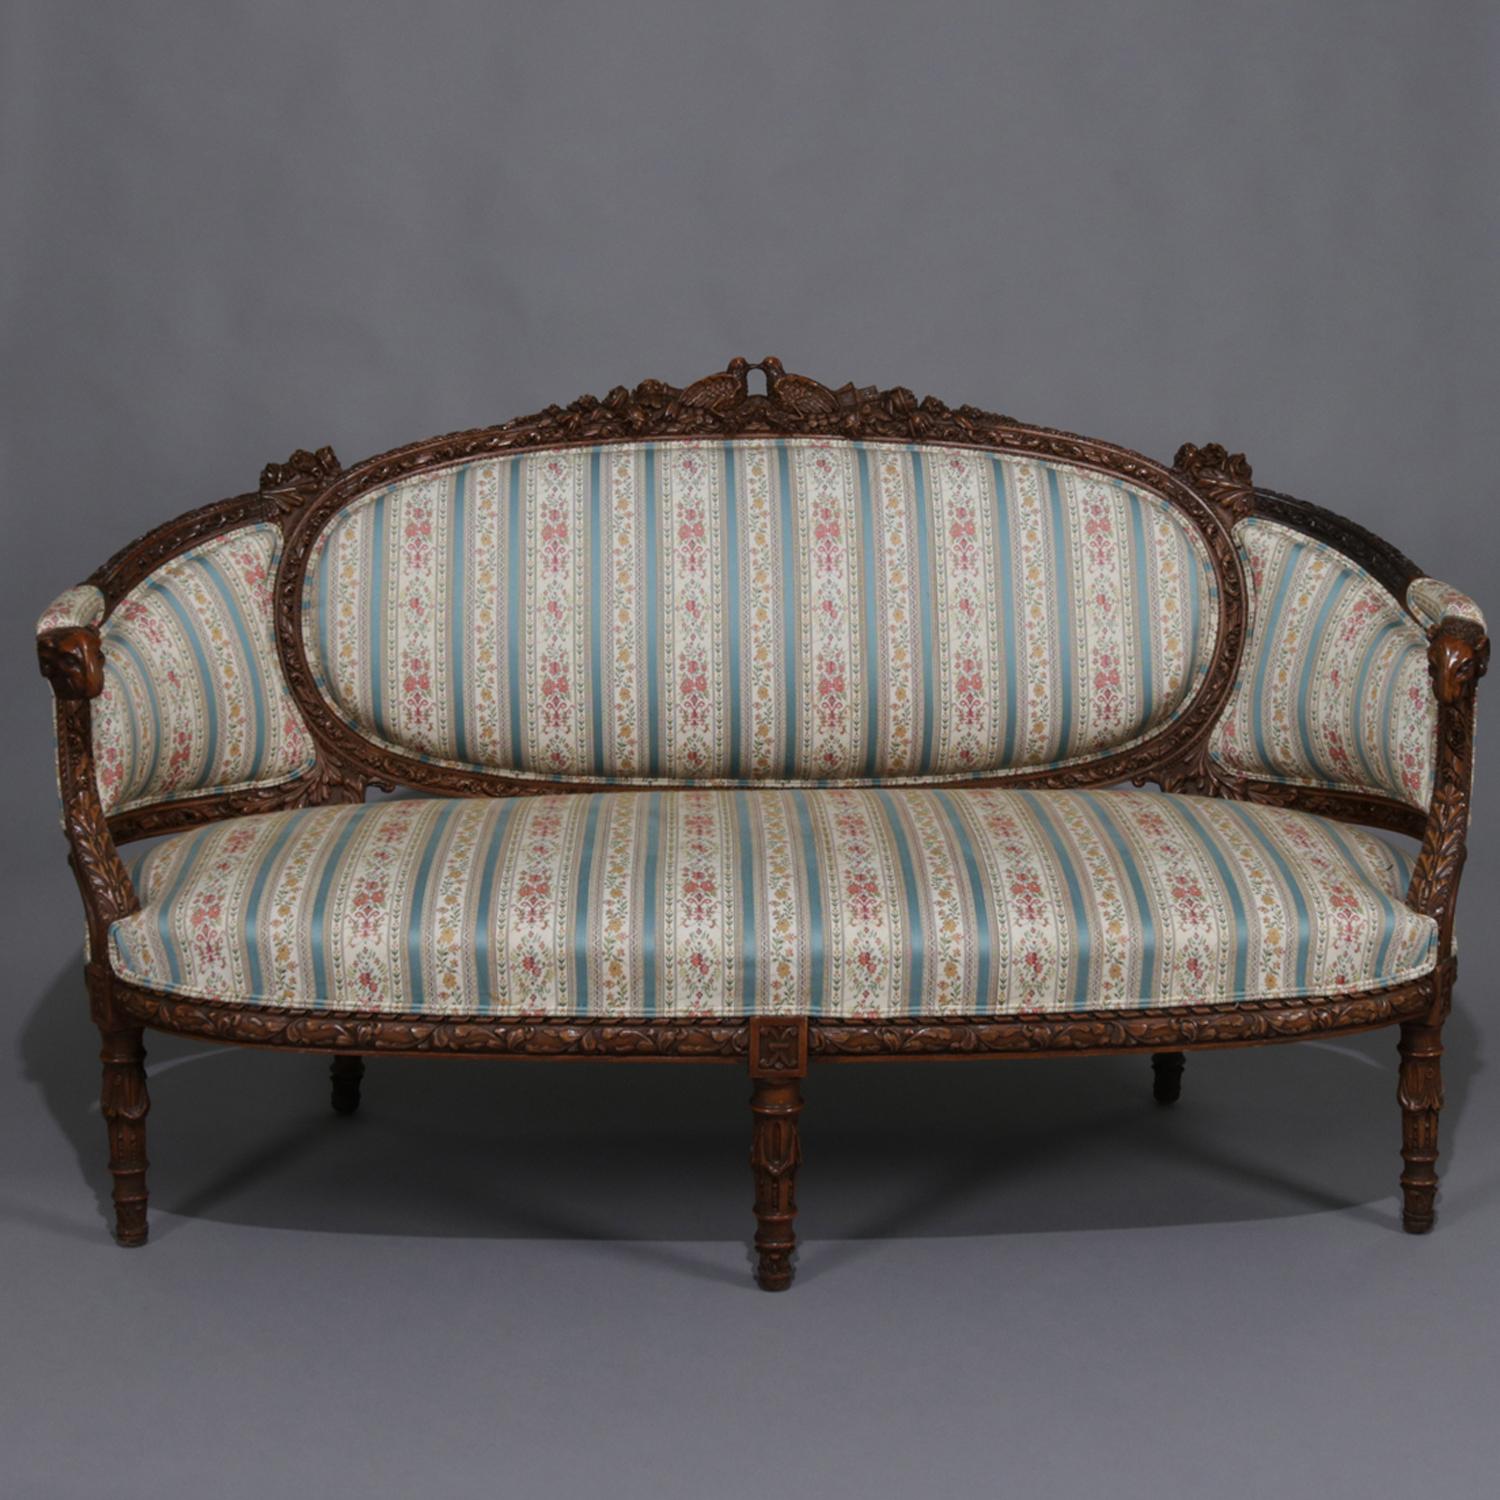 Antique Italian figural three-piece upholstered parlor set features carved walnut frames with doves, flowers and ram heads, includes settee with two arm chairs, 19th century

Measures: settee 66